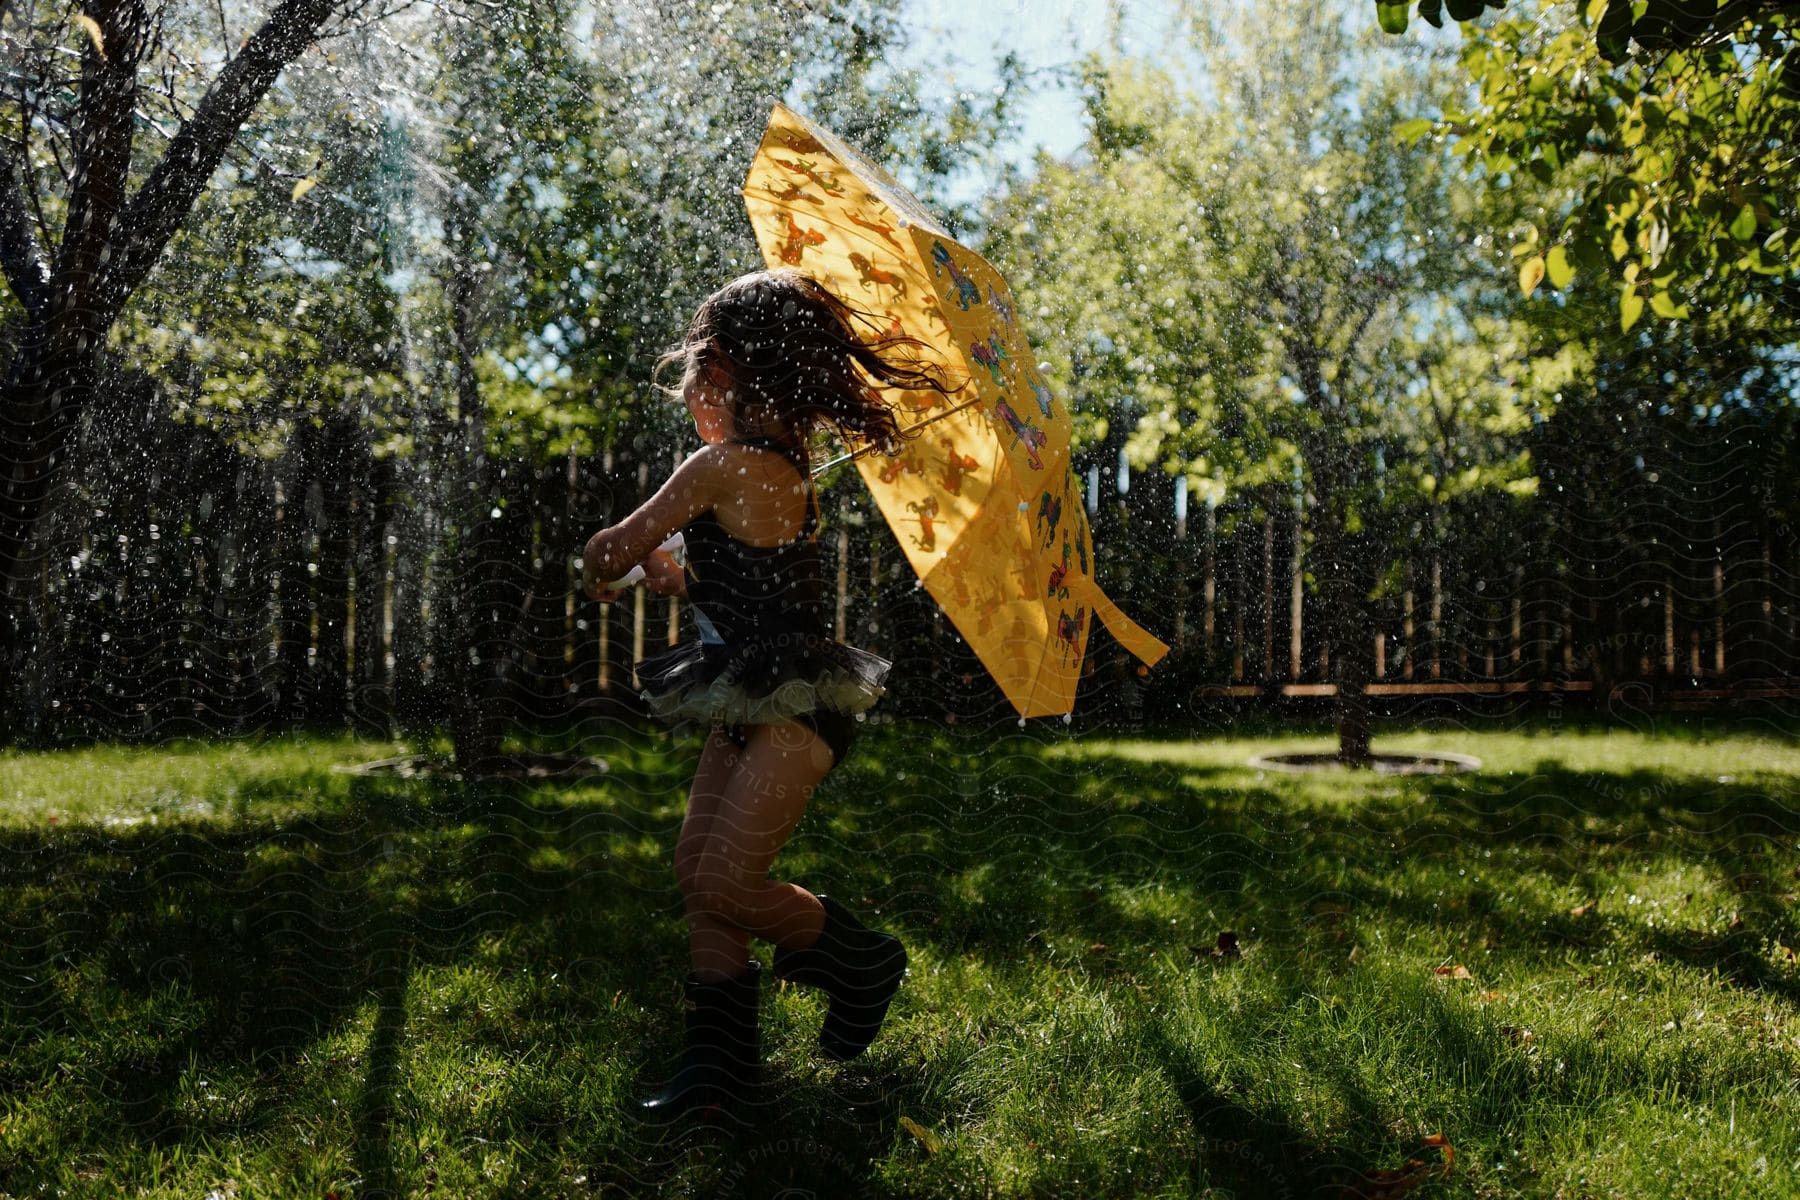 A little girl is holding an umbrella as she plays in a water sprinkler in her yard